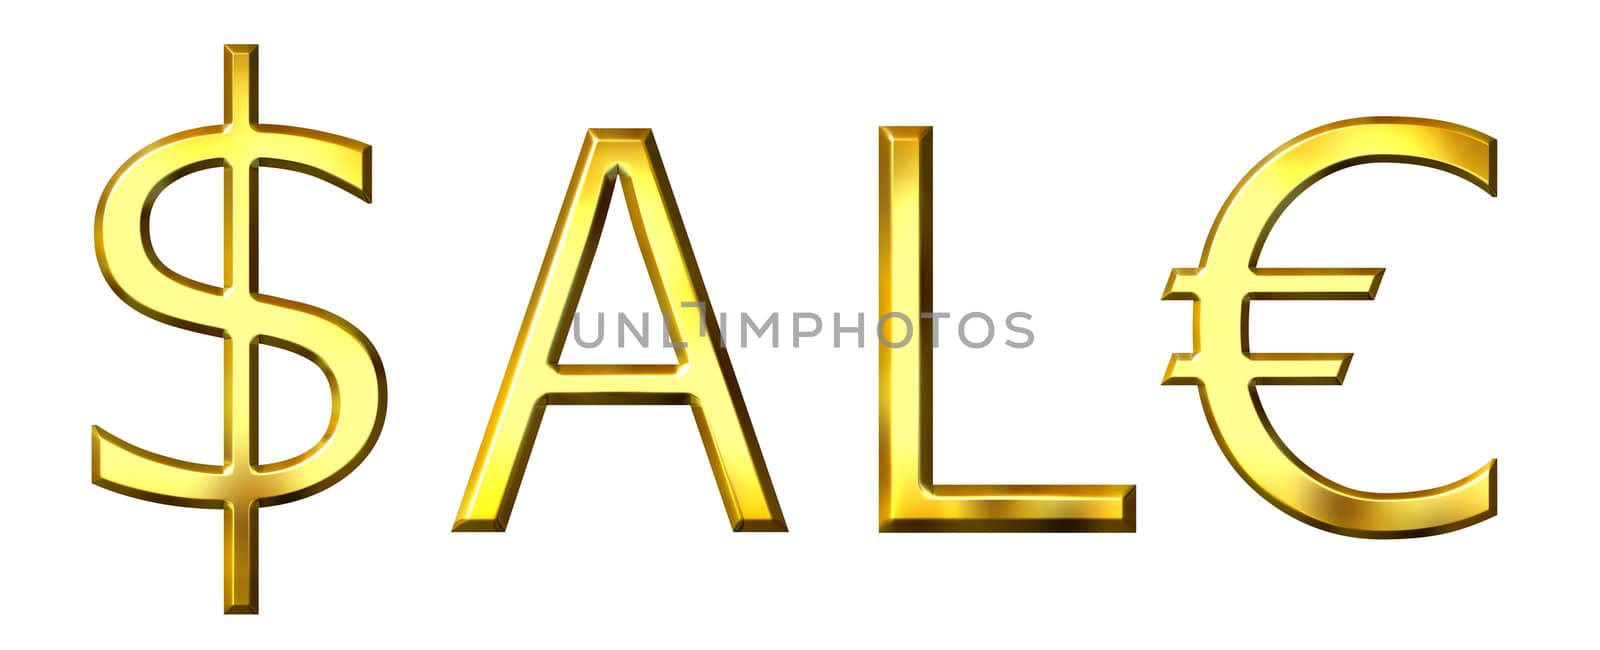 3d golden sale concept isolated in white